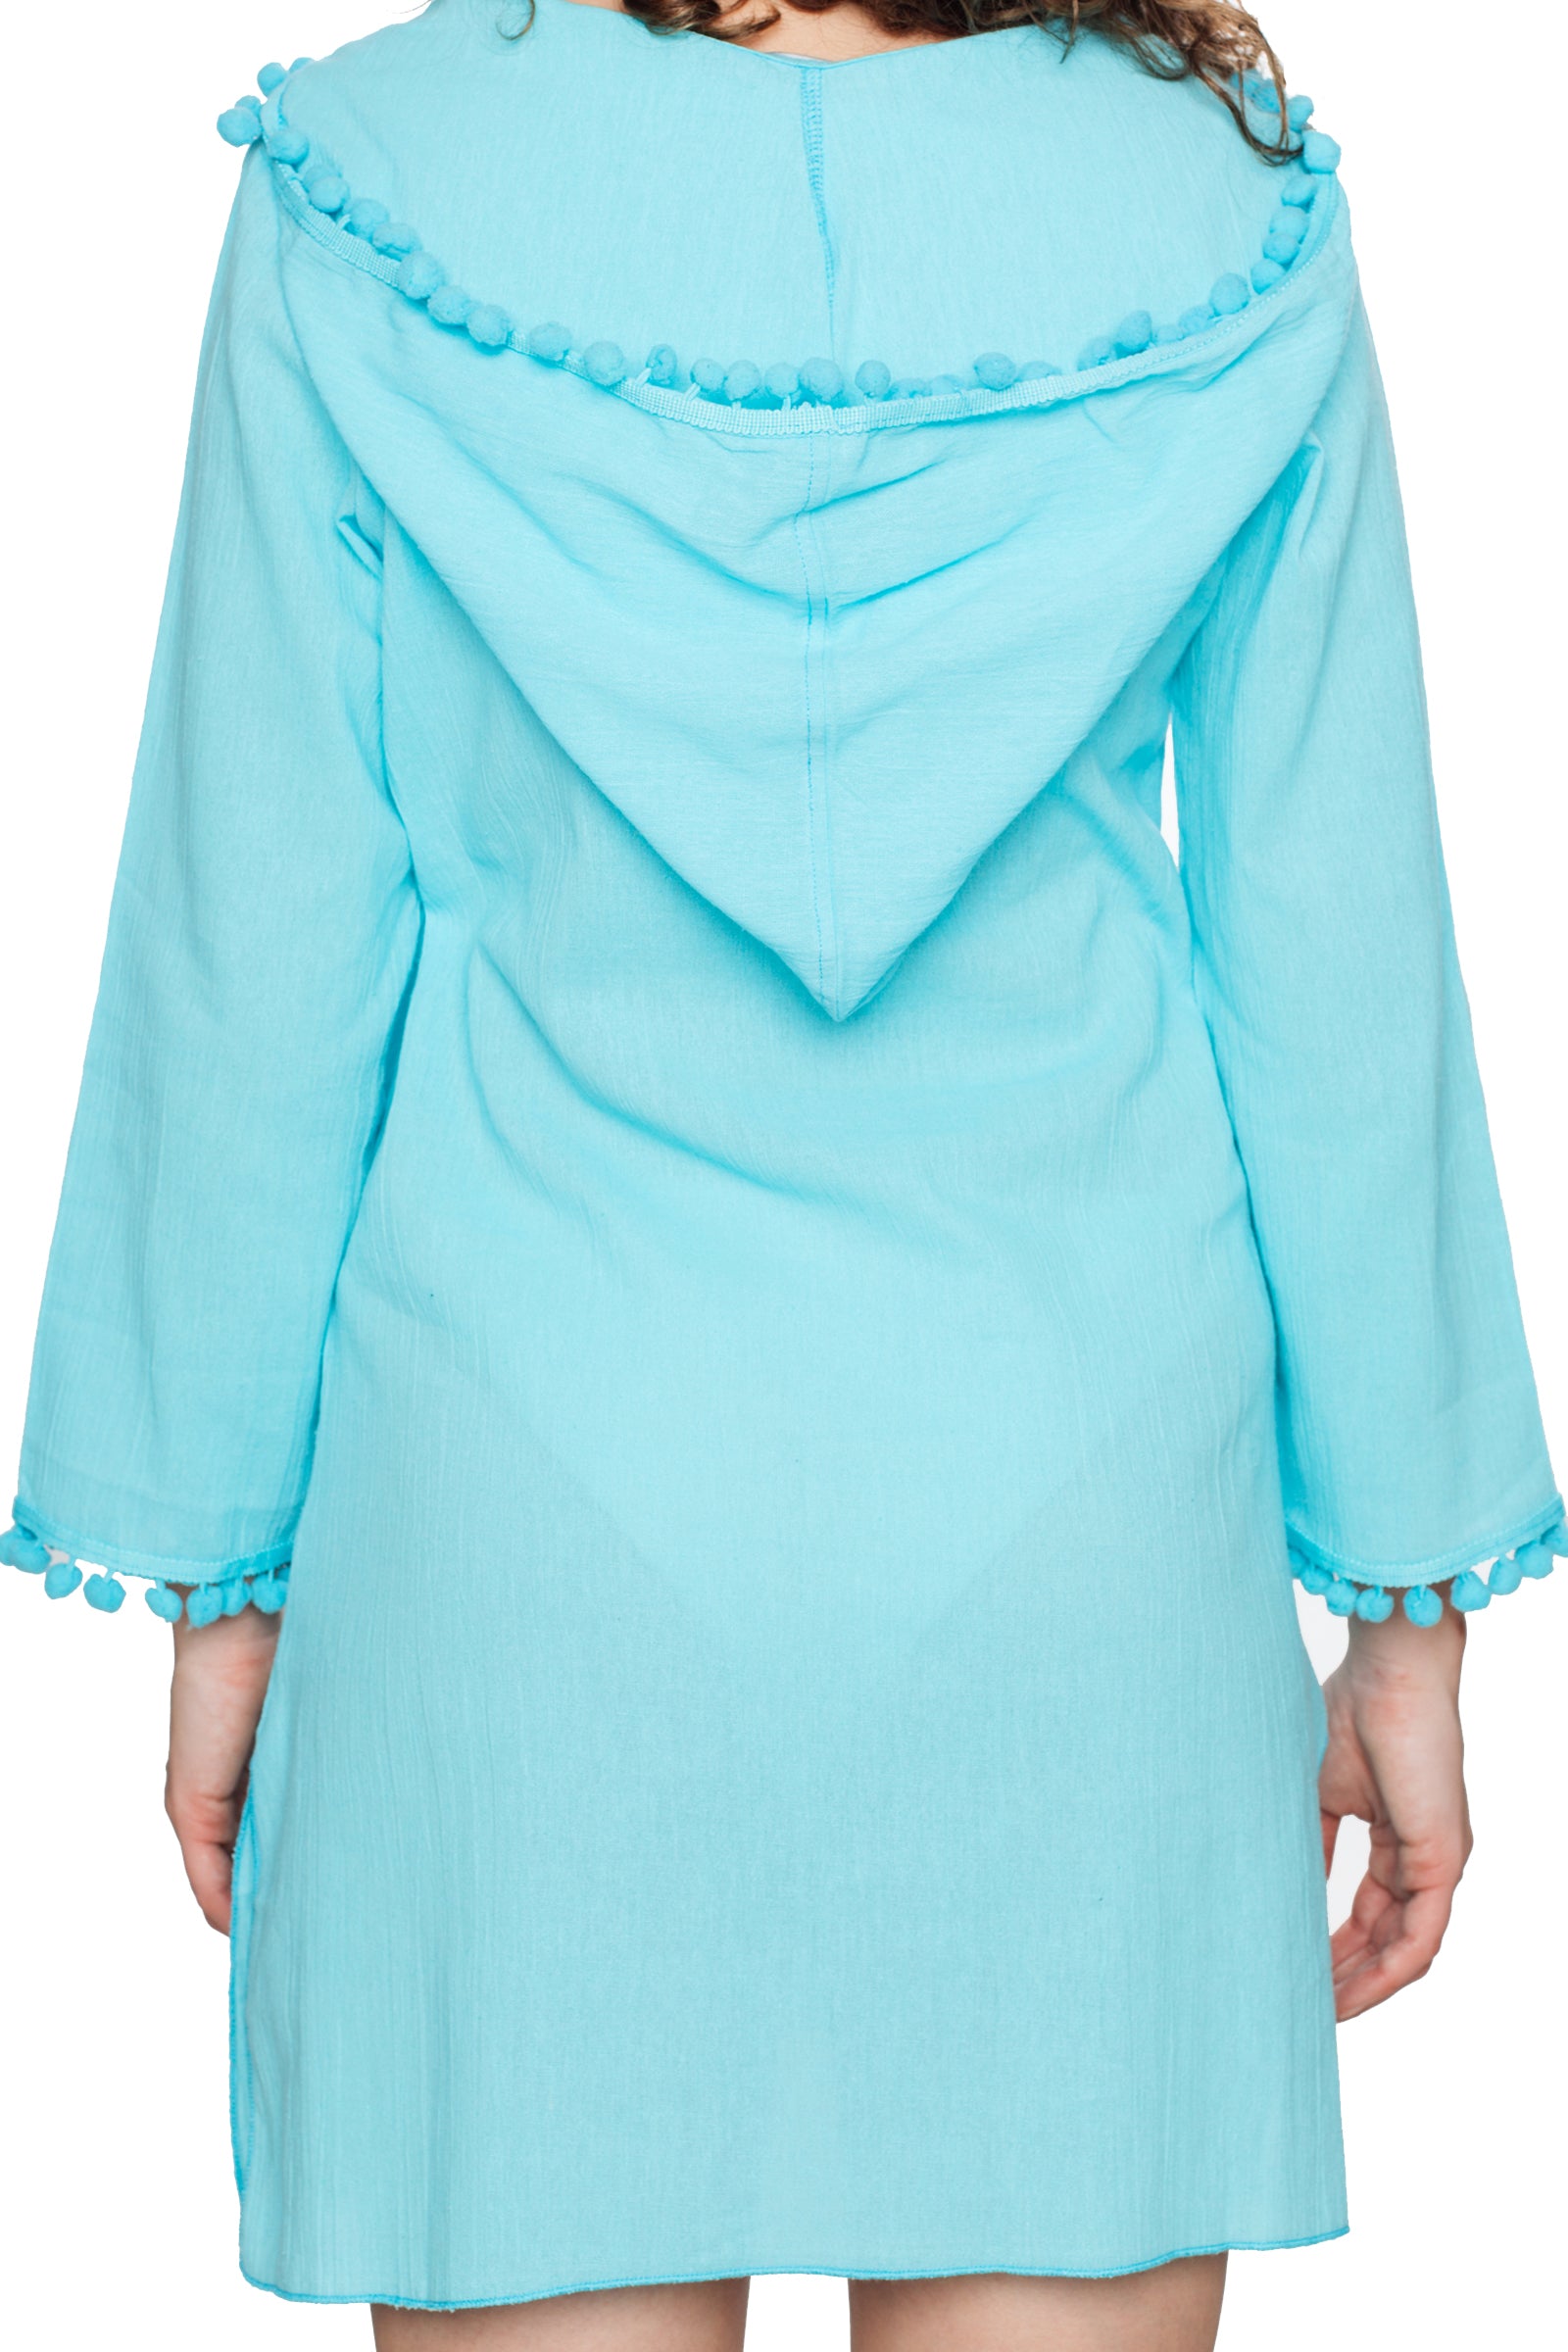 Turquoise Hooded Long Sleeve Cotton Coverup